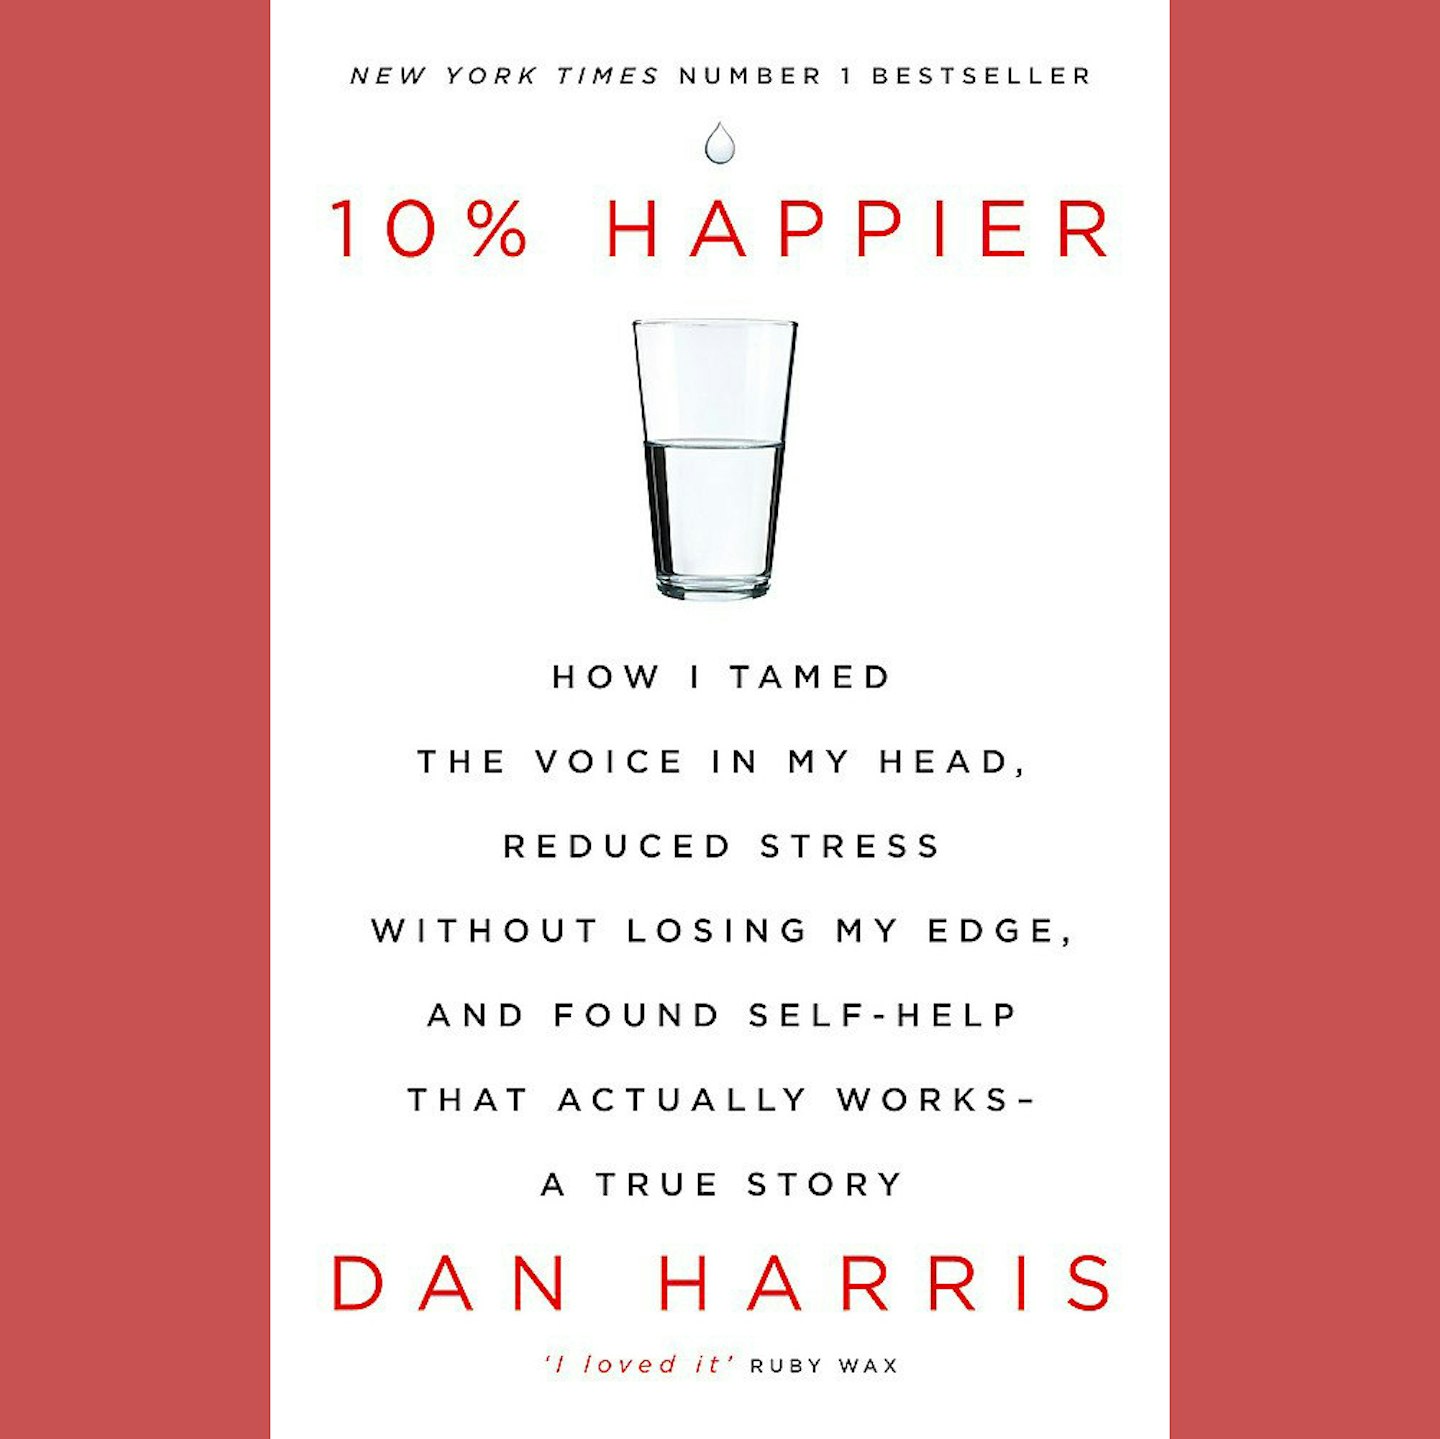 10% Happier: How I Tamed the Voice in My Head, Reduced Stress Without Losing My Edge, and Found Self-Help That Actually Works by Dan Harris